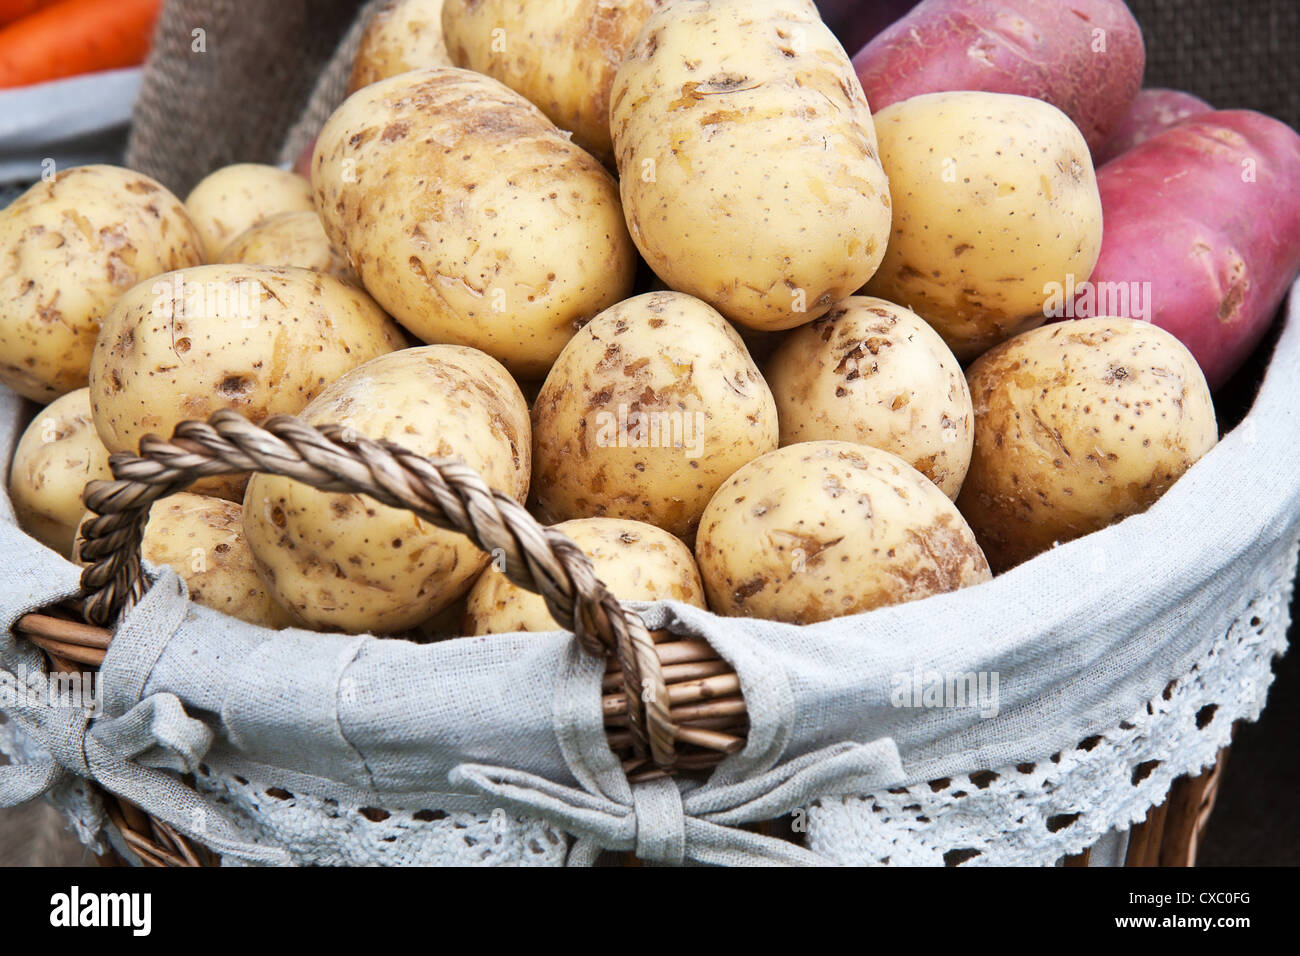 Fresh new potatoes in the basket Stock Photo